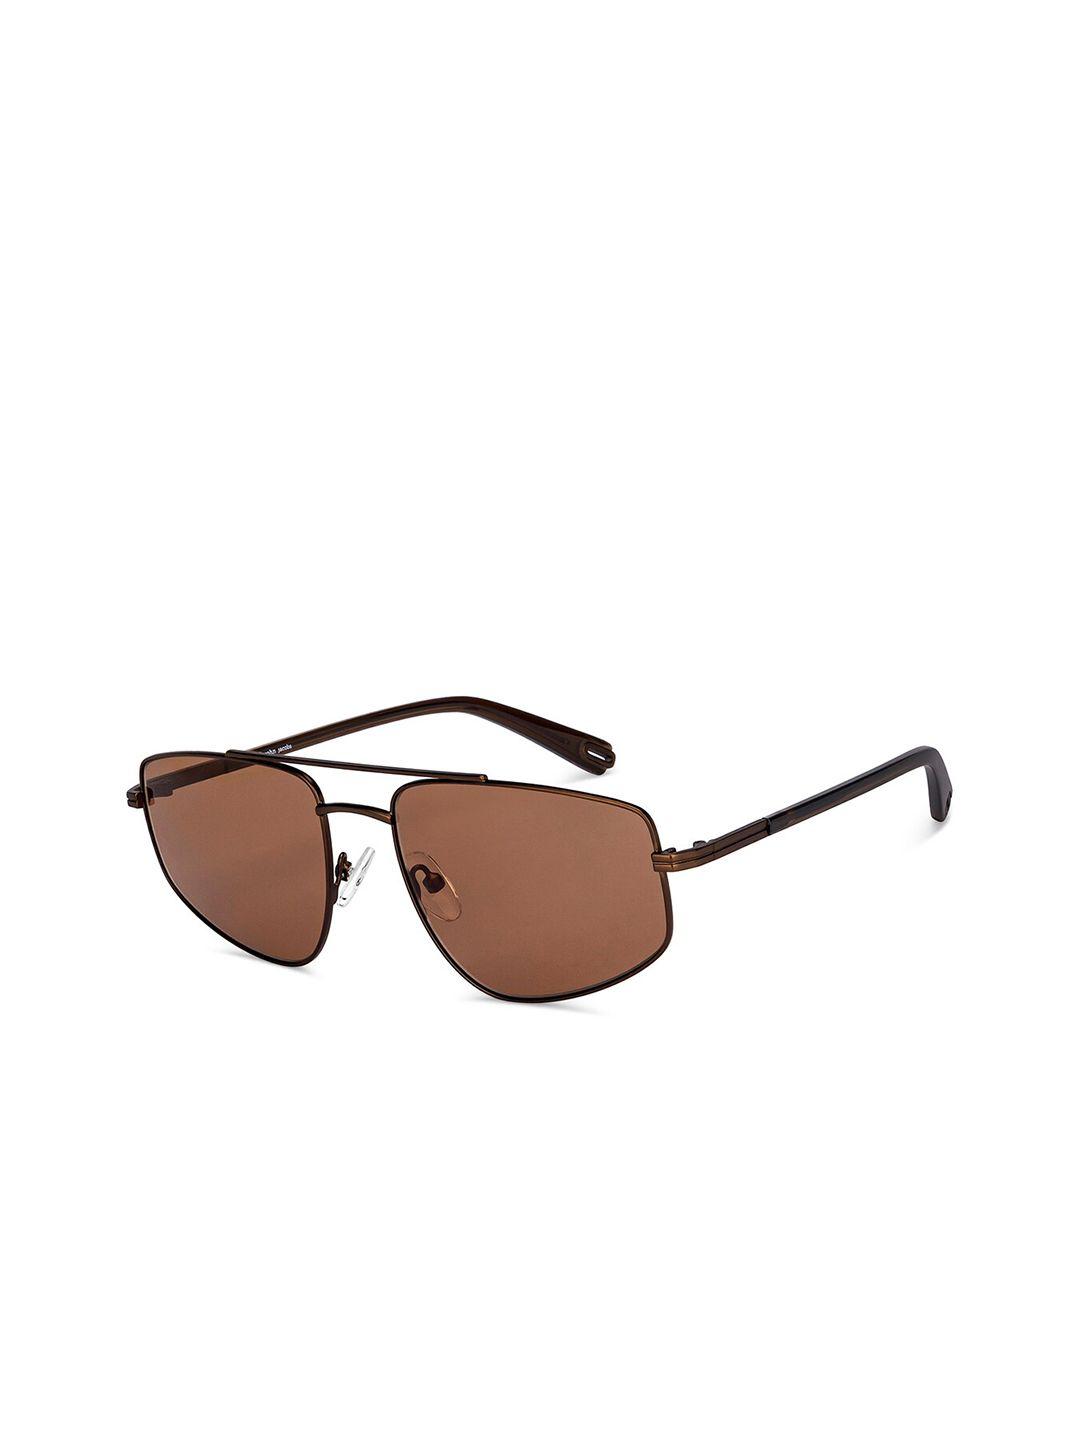 john jacobs unisex brown lens & gunmetal-toned round sunglasses with uv protected lens